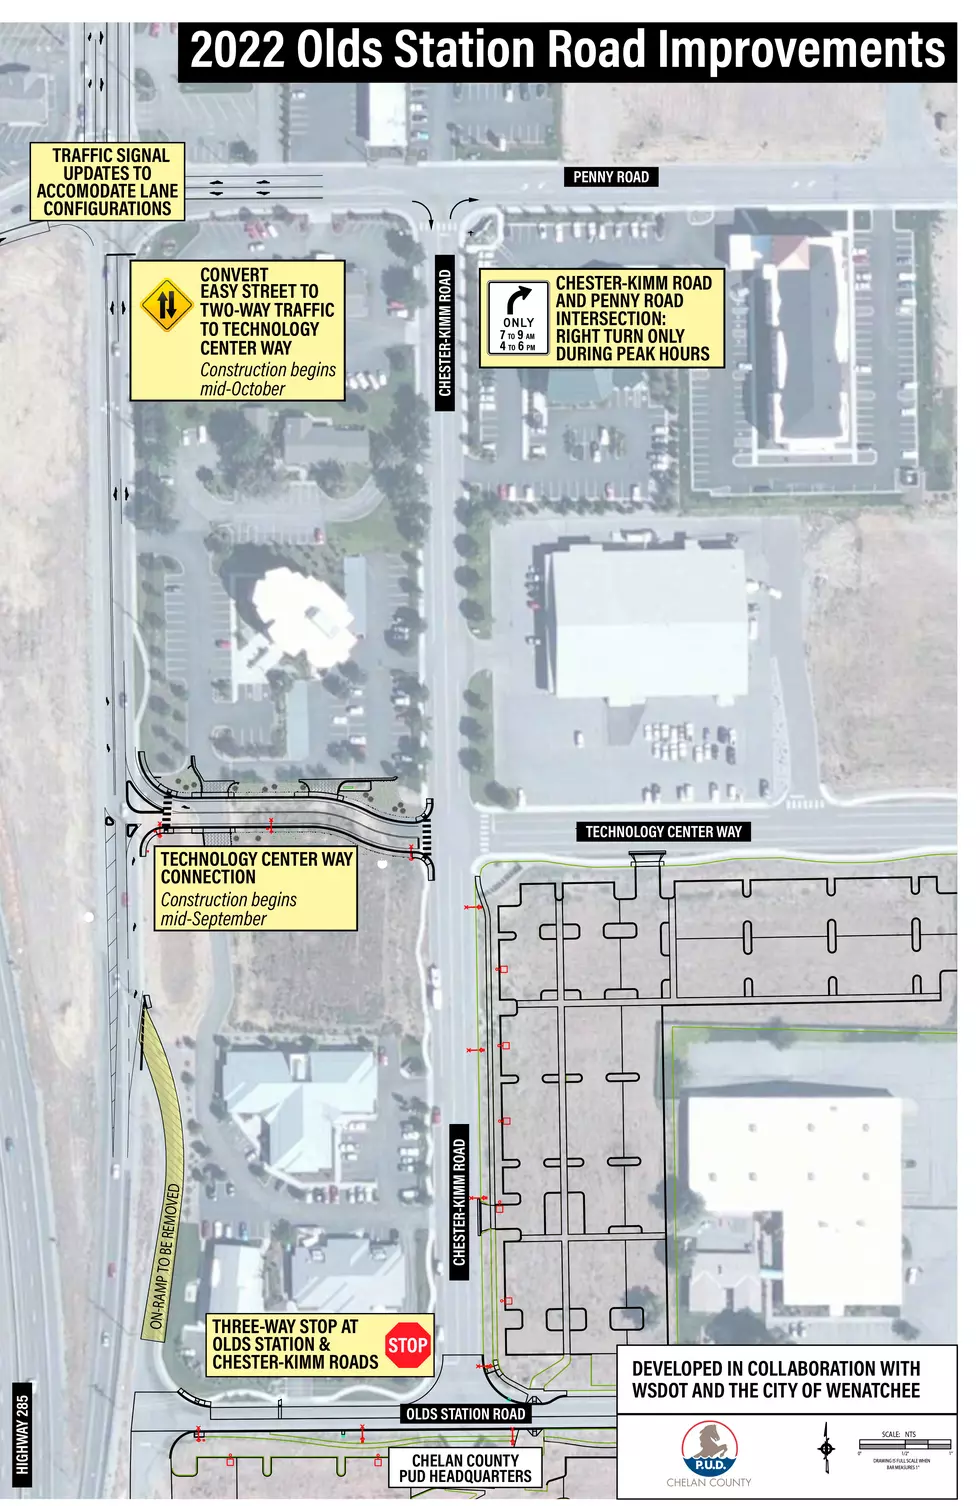 Chelan County PUD Begins Work on Traffic Changes Near New Service Center at Olds Station